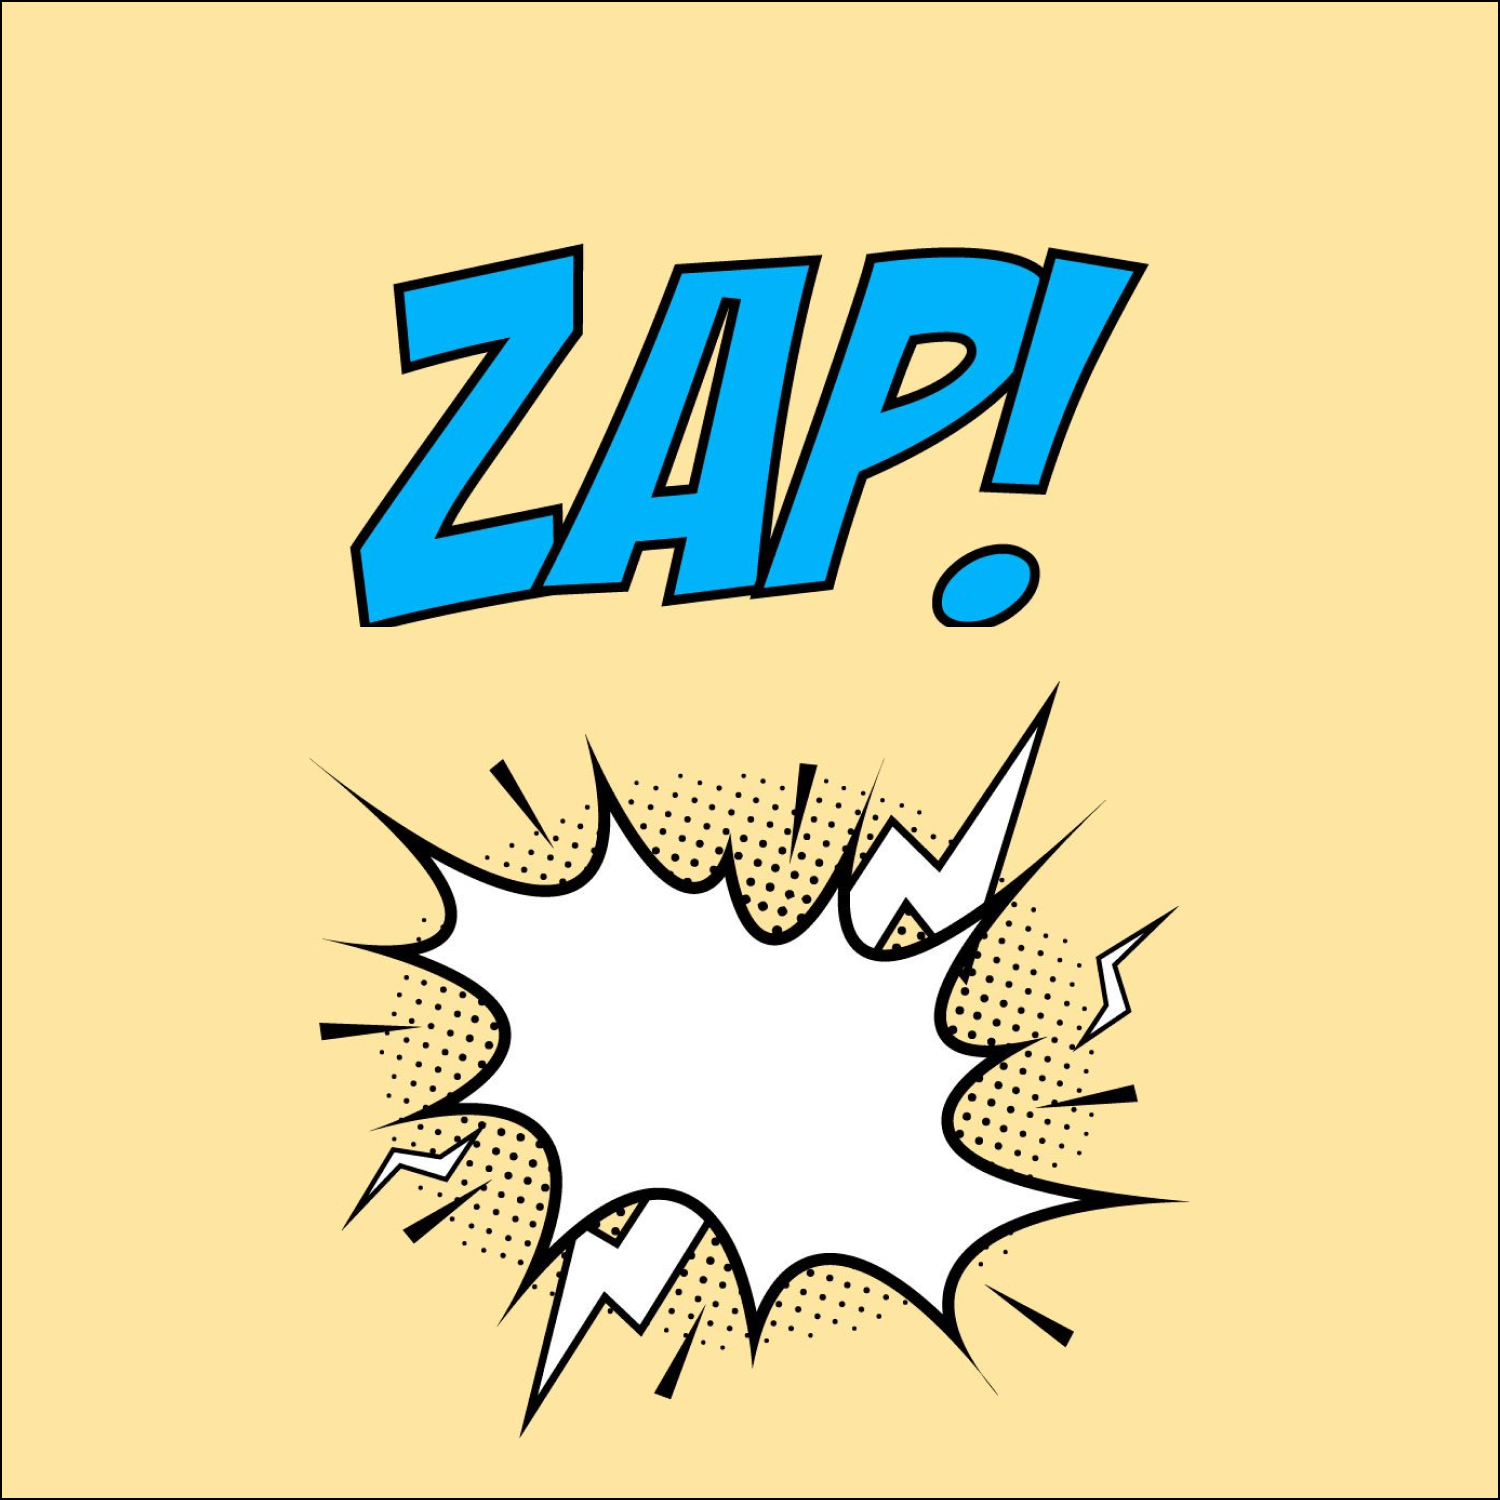 Zap Comic Explosion with a Thunder cover.